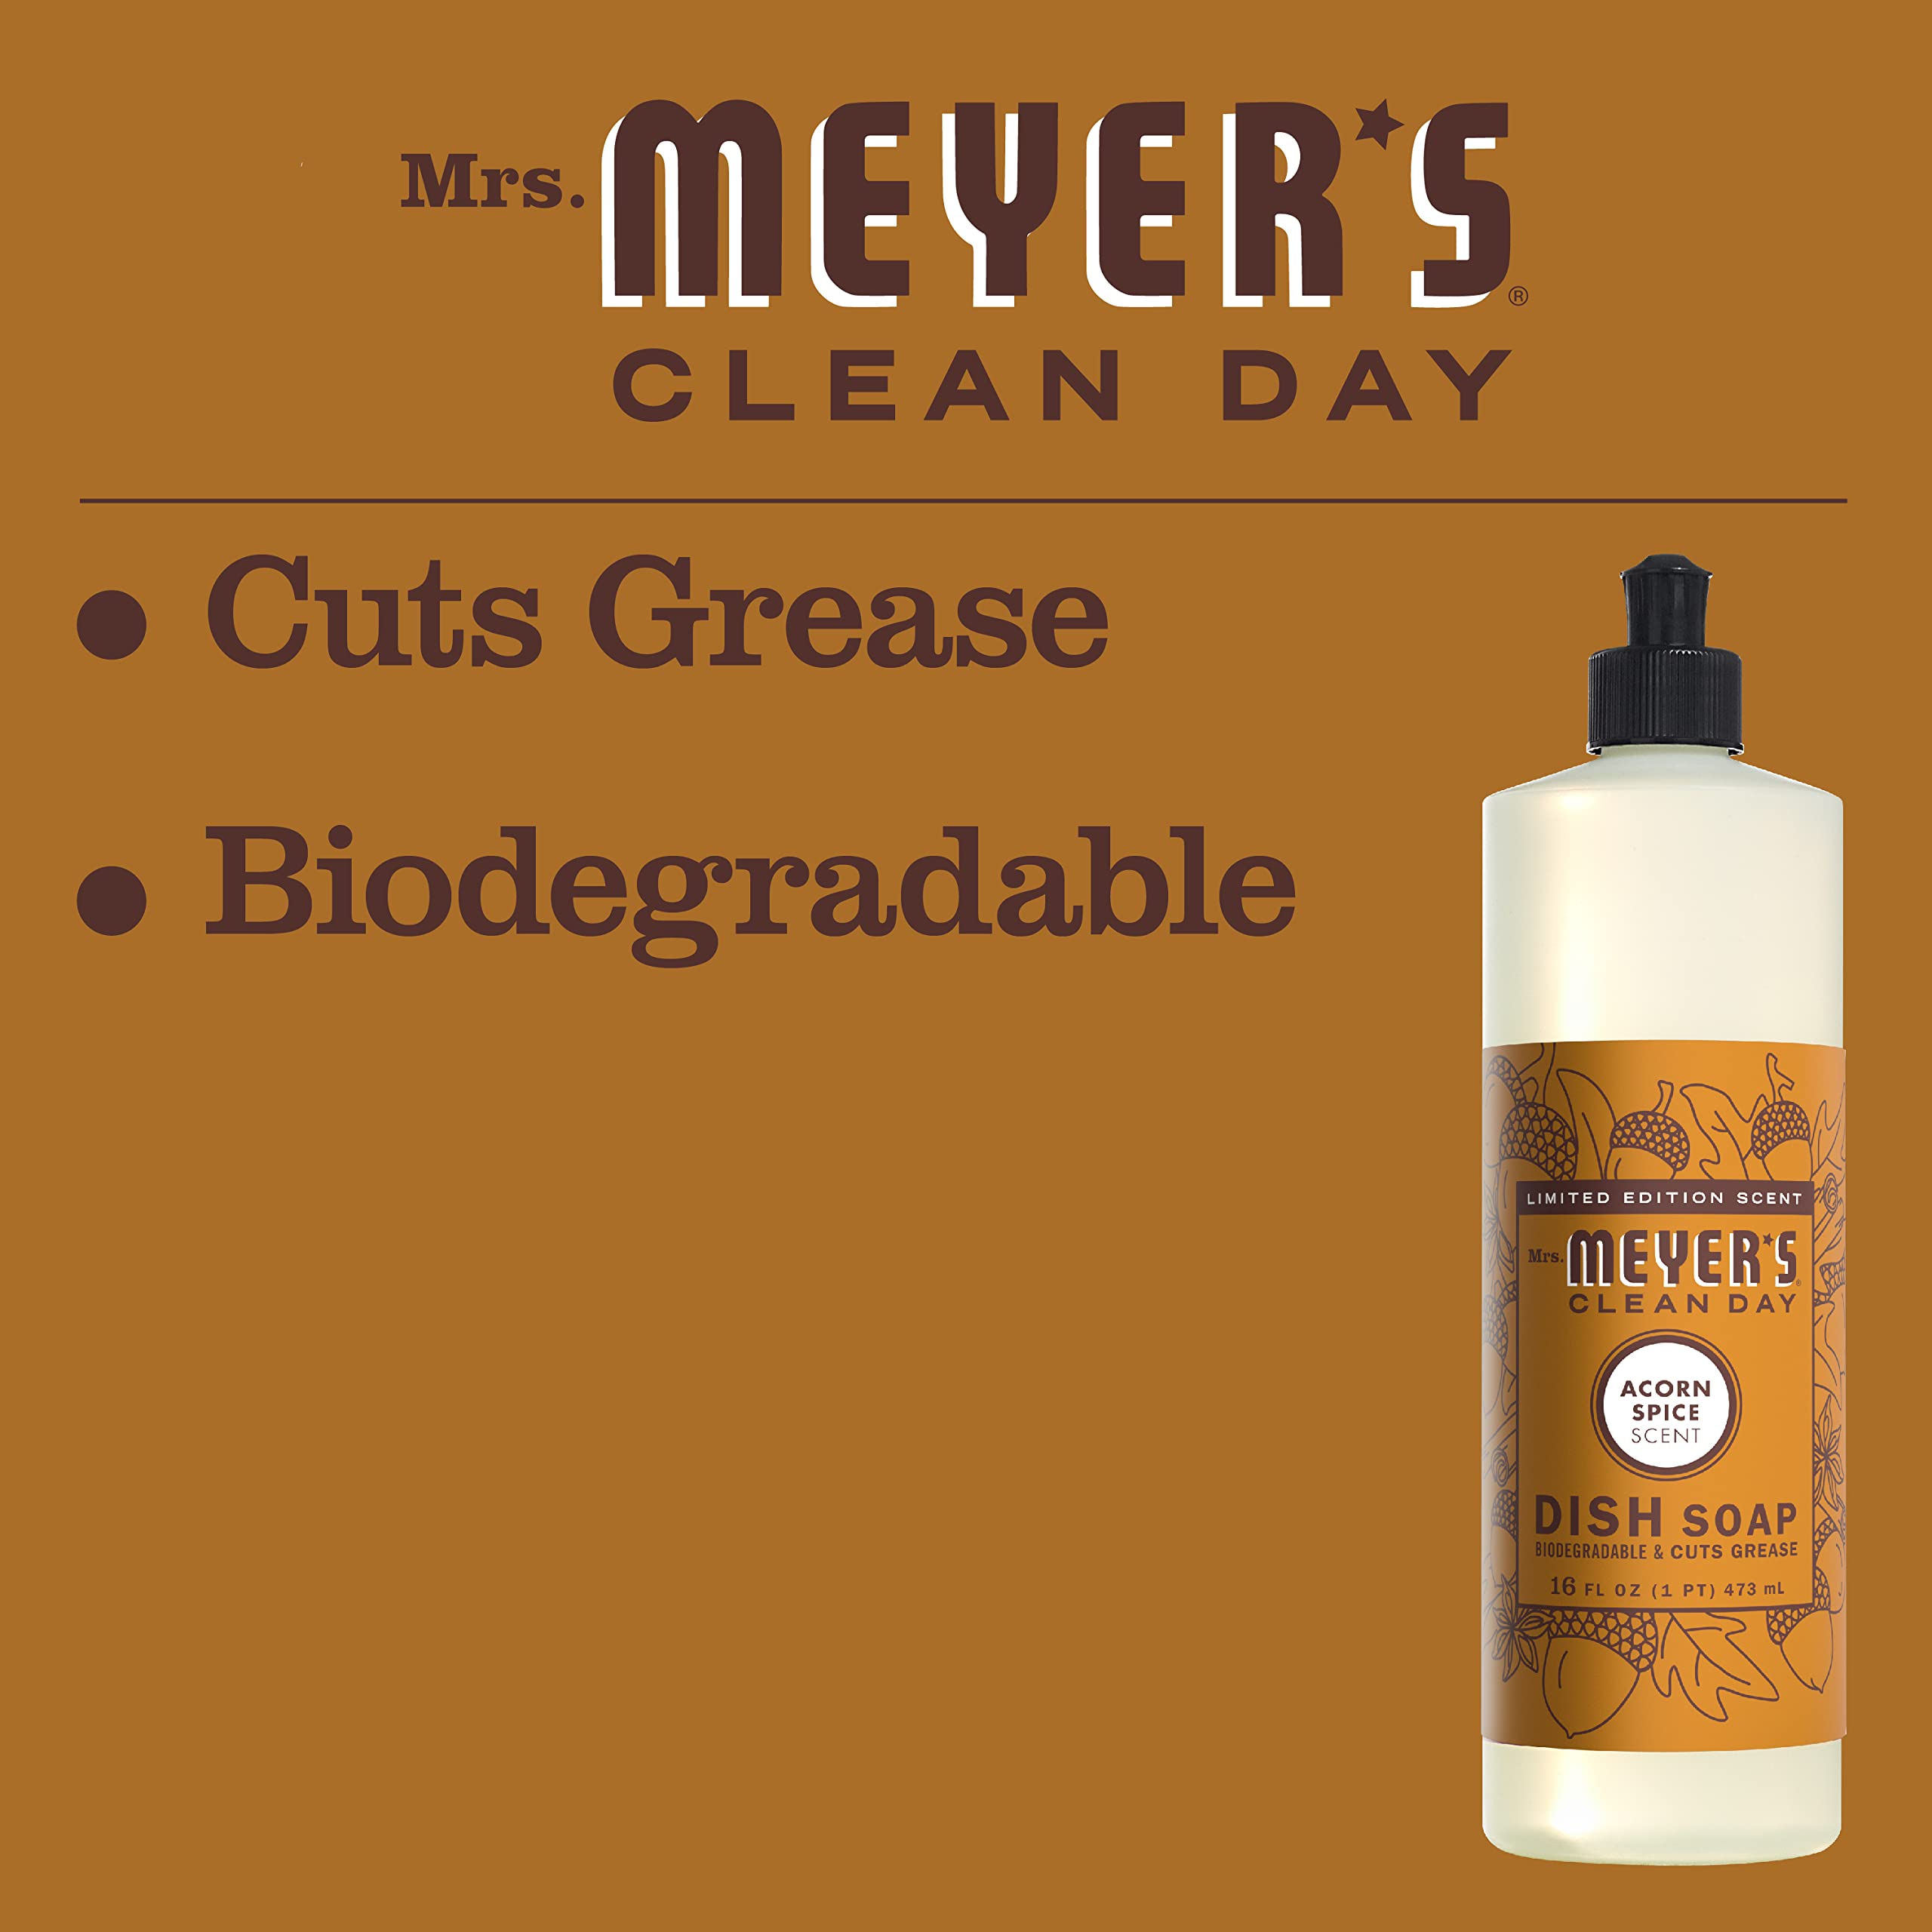 MRS. MEYER'S CLEAN DAY Liquid Dish Soap, Biodegradable Formula, Limited Edition Acorn Spice, 16 fl. oz - Pack of 3